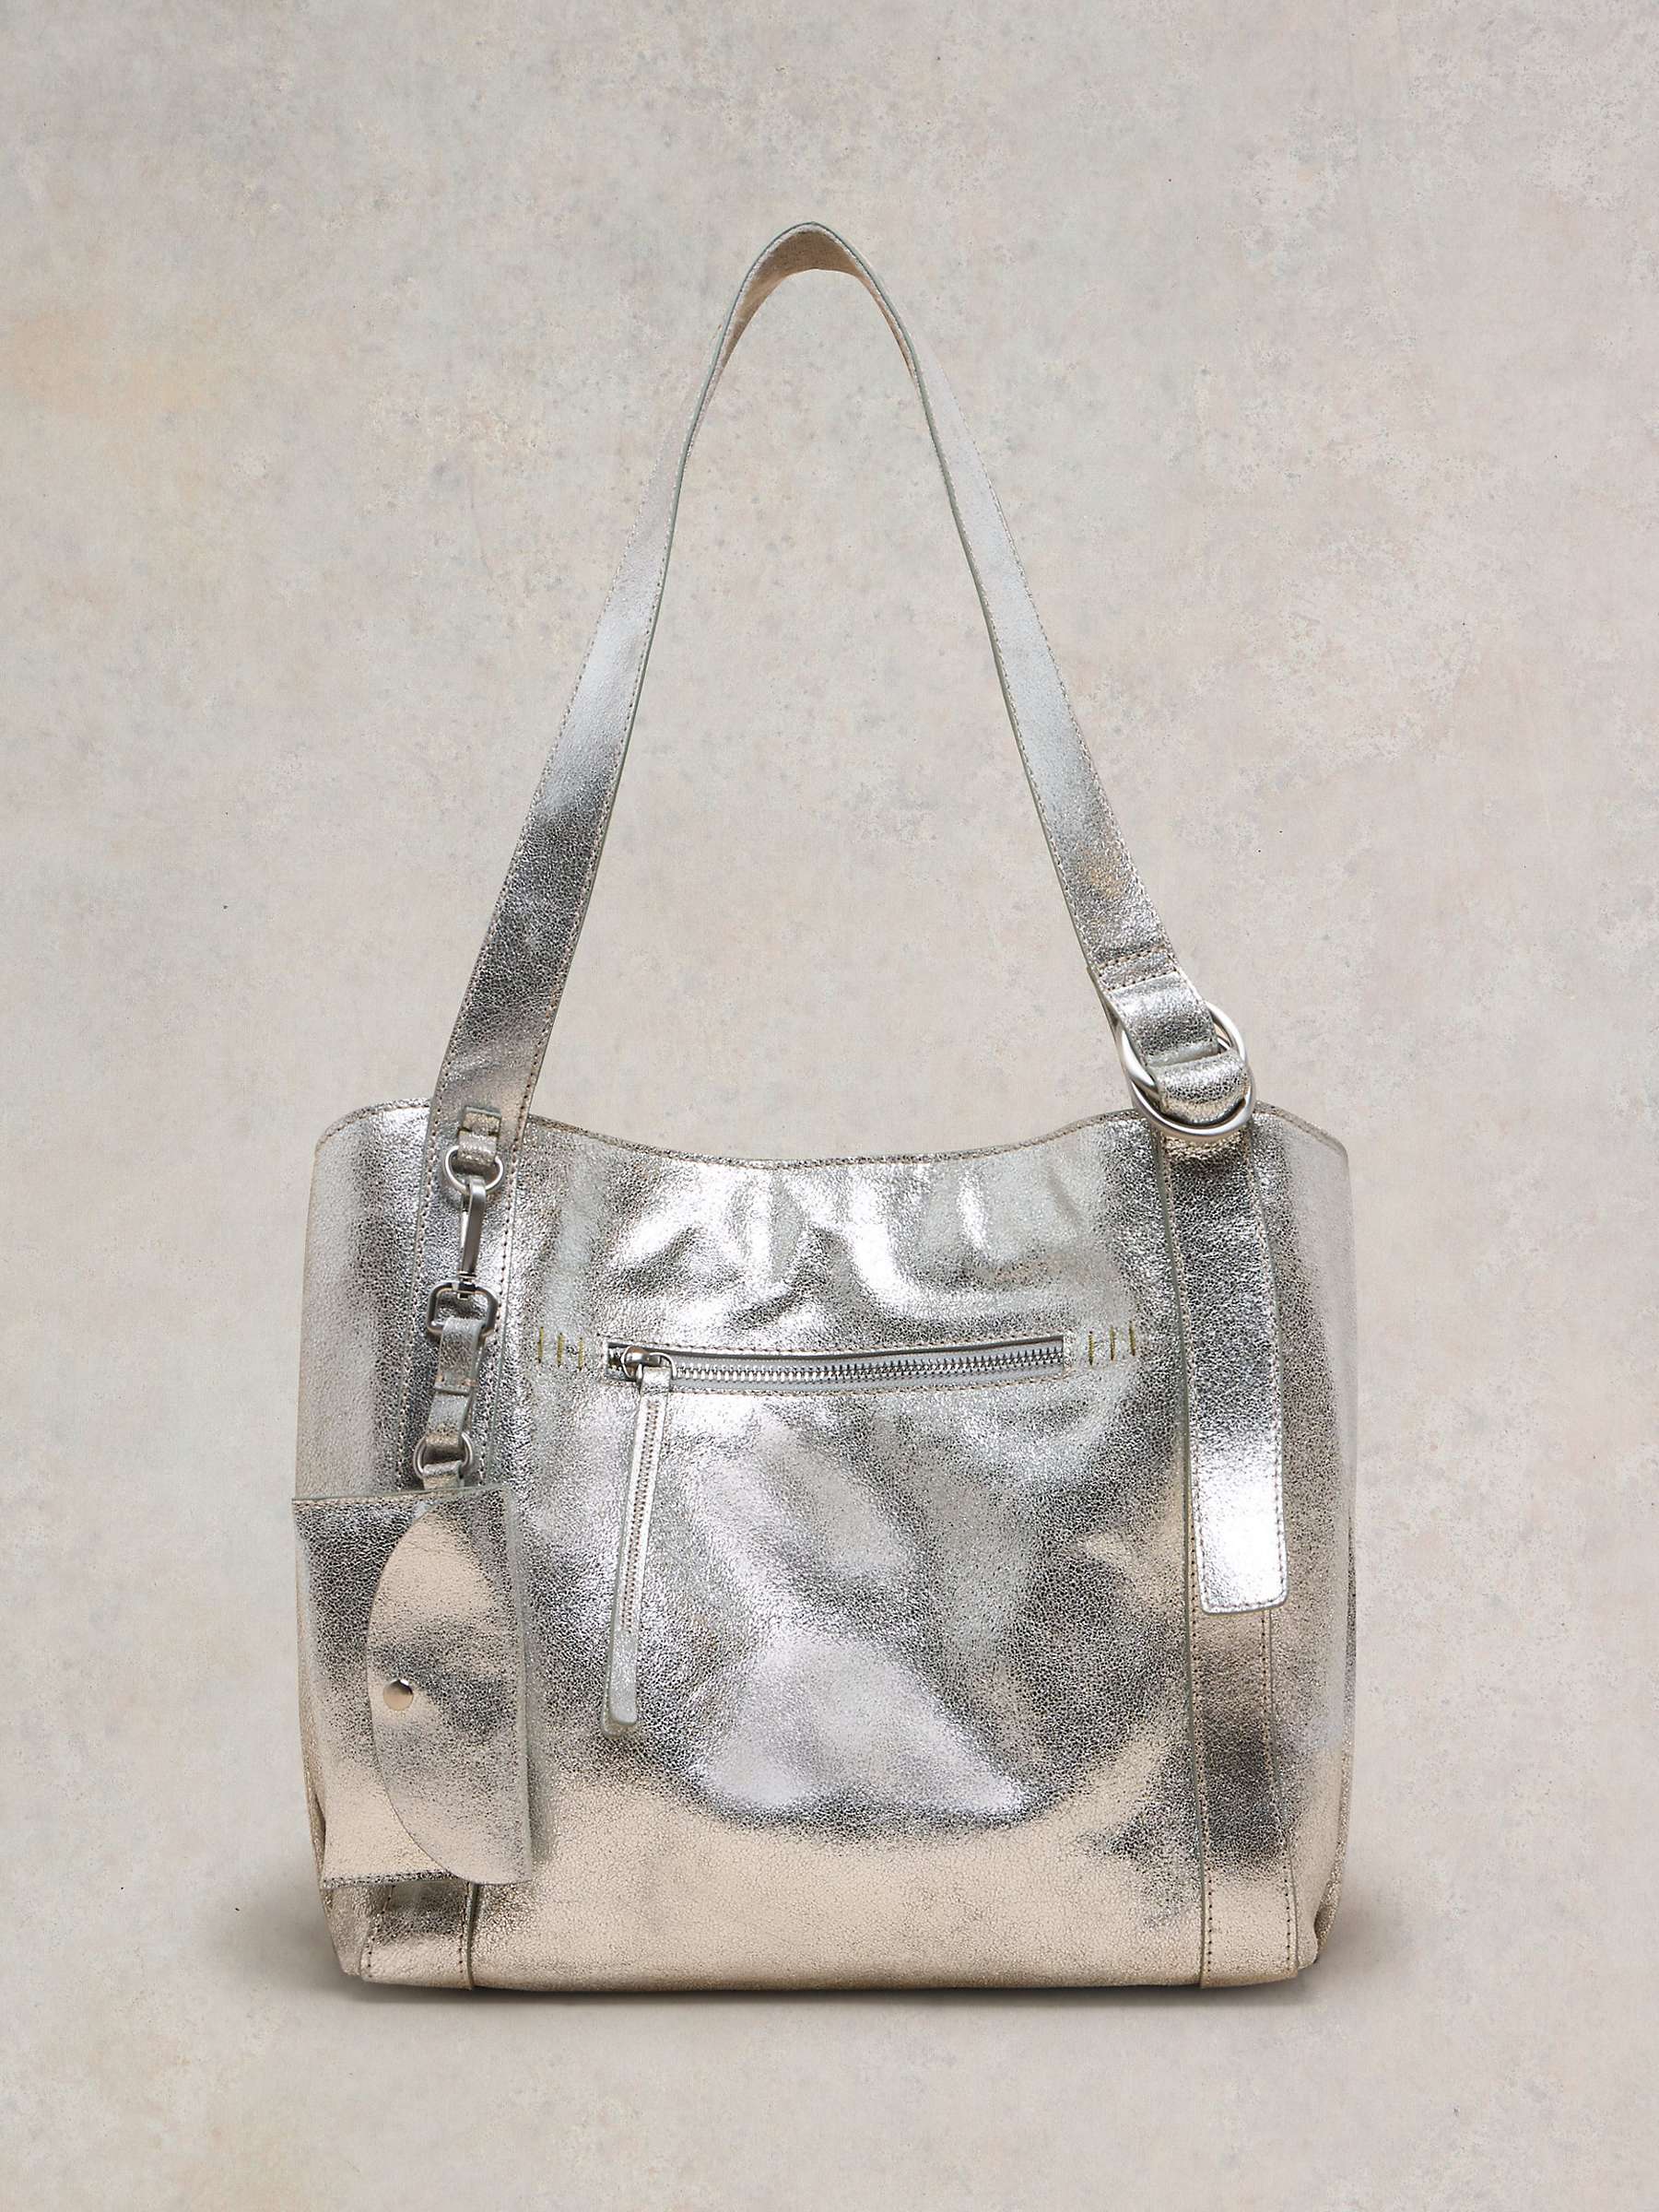 Buy White Stuff Hannah Leather Tote Bag, Silver Online at johnlewis.com